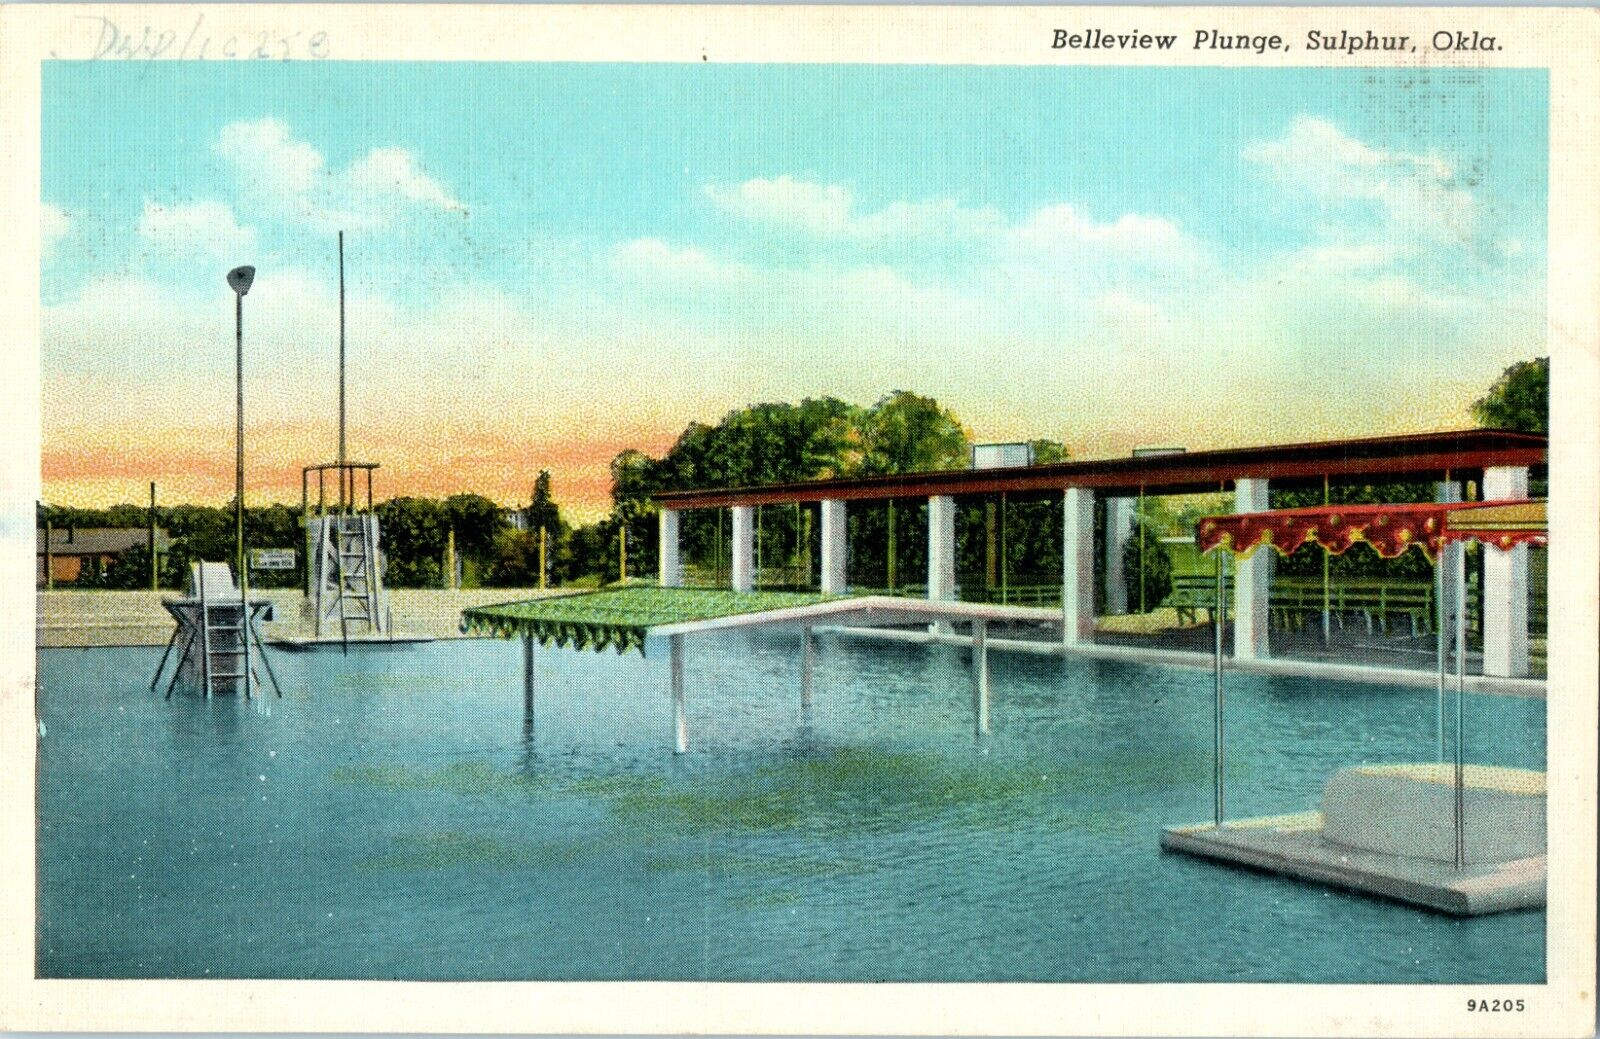 SULPHUR OKLAHOMA BELLEVIEW PLUNGE SWIMMING AREA MURRAY COUNTY POSTCARD D8